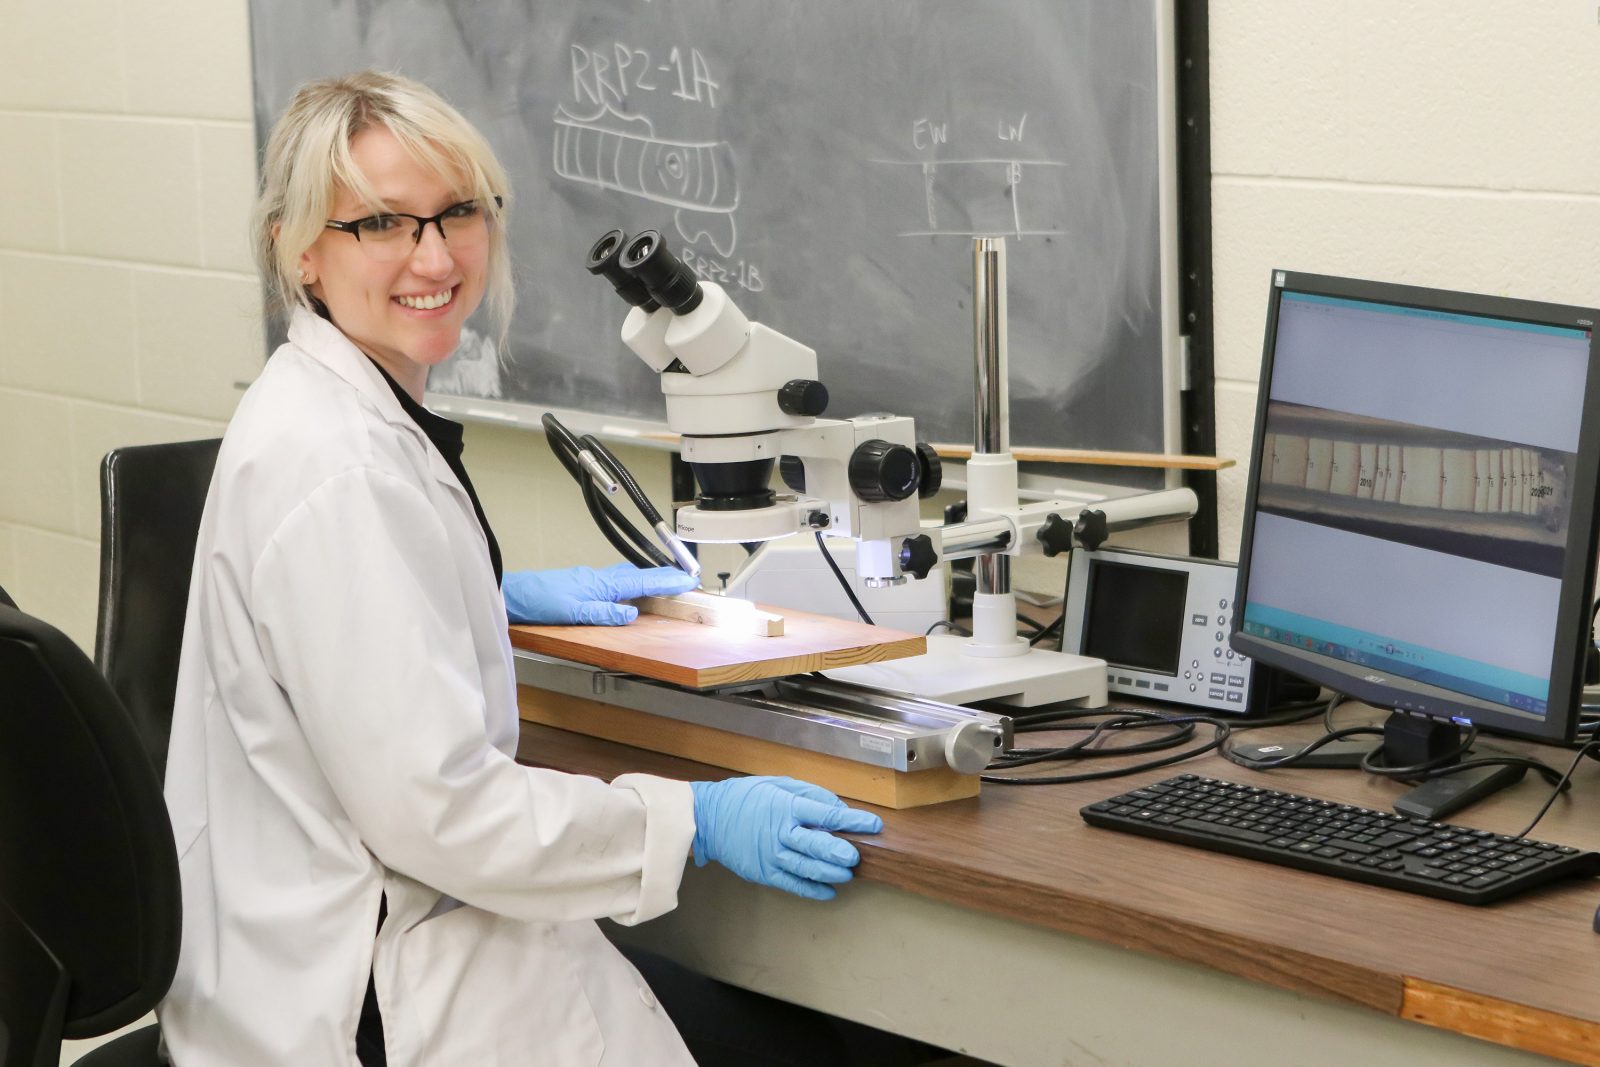 Brock University graduate student Danielle Martin sits at a table with a microscope and computer screen. She is wearing a white lab coat and blue safety gloves as she smiles at the camera.